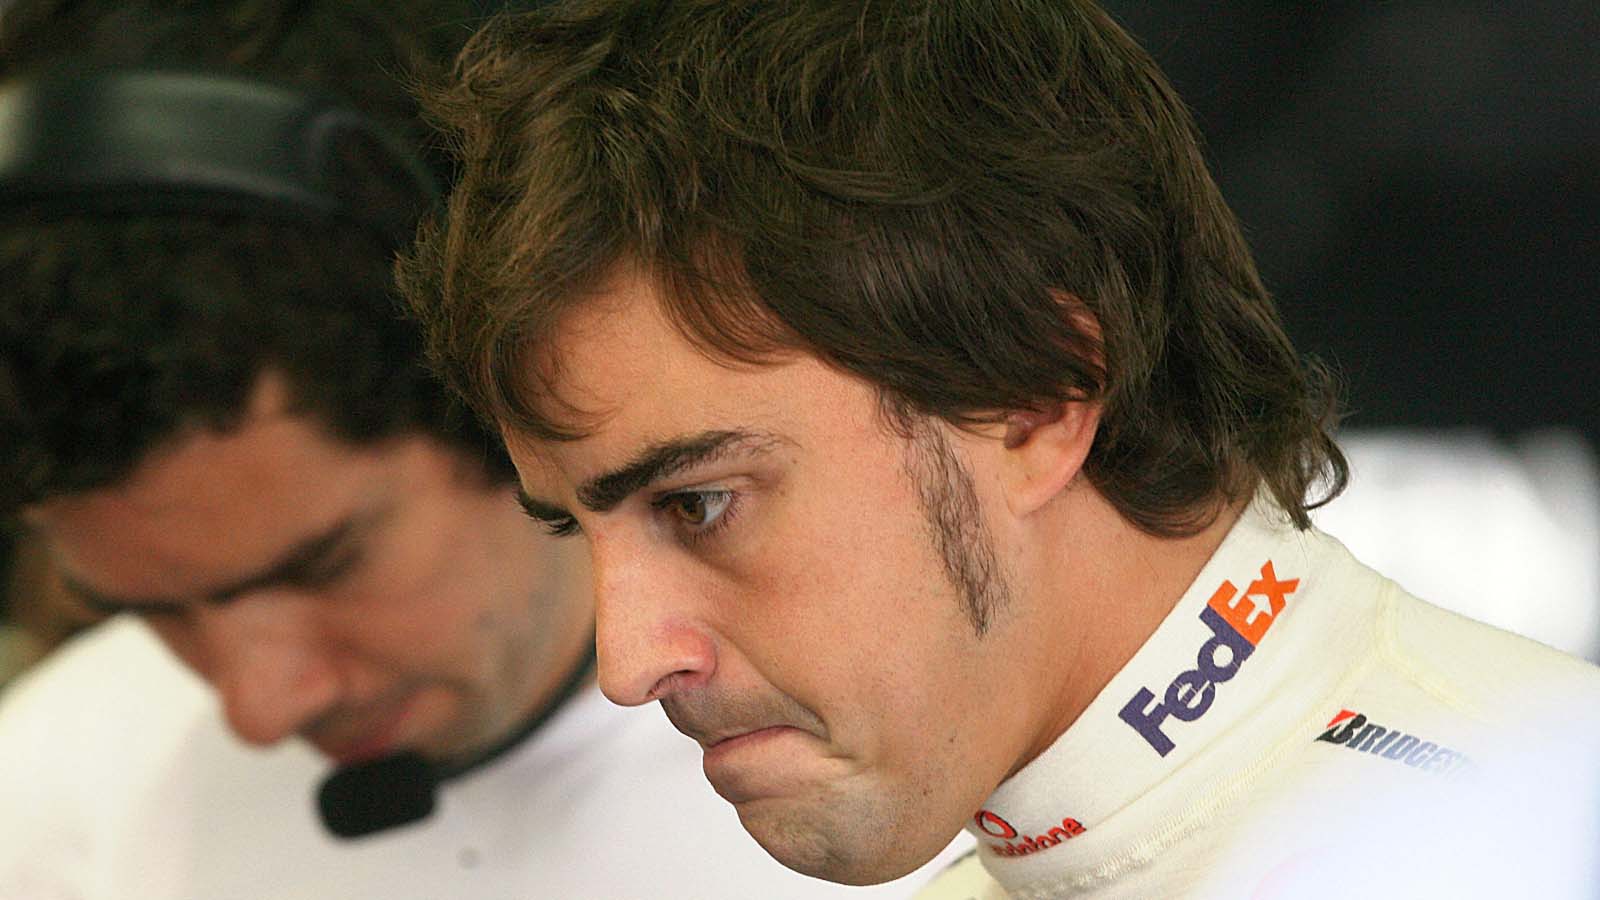 Fernando Alonso with his head down. Brazil 2007.